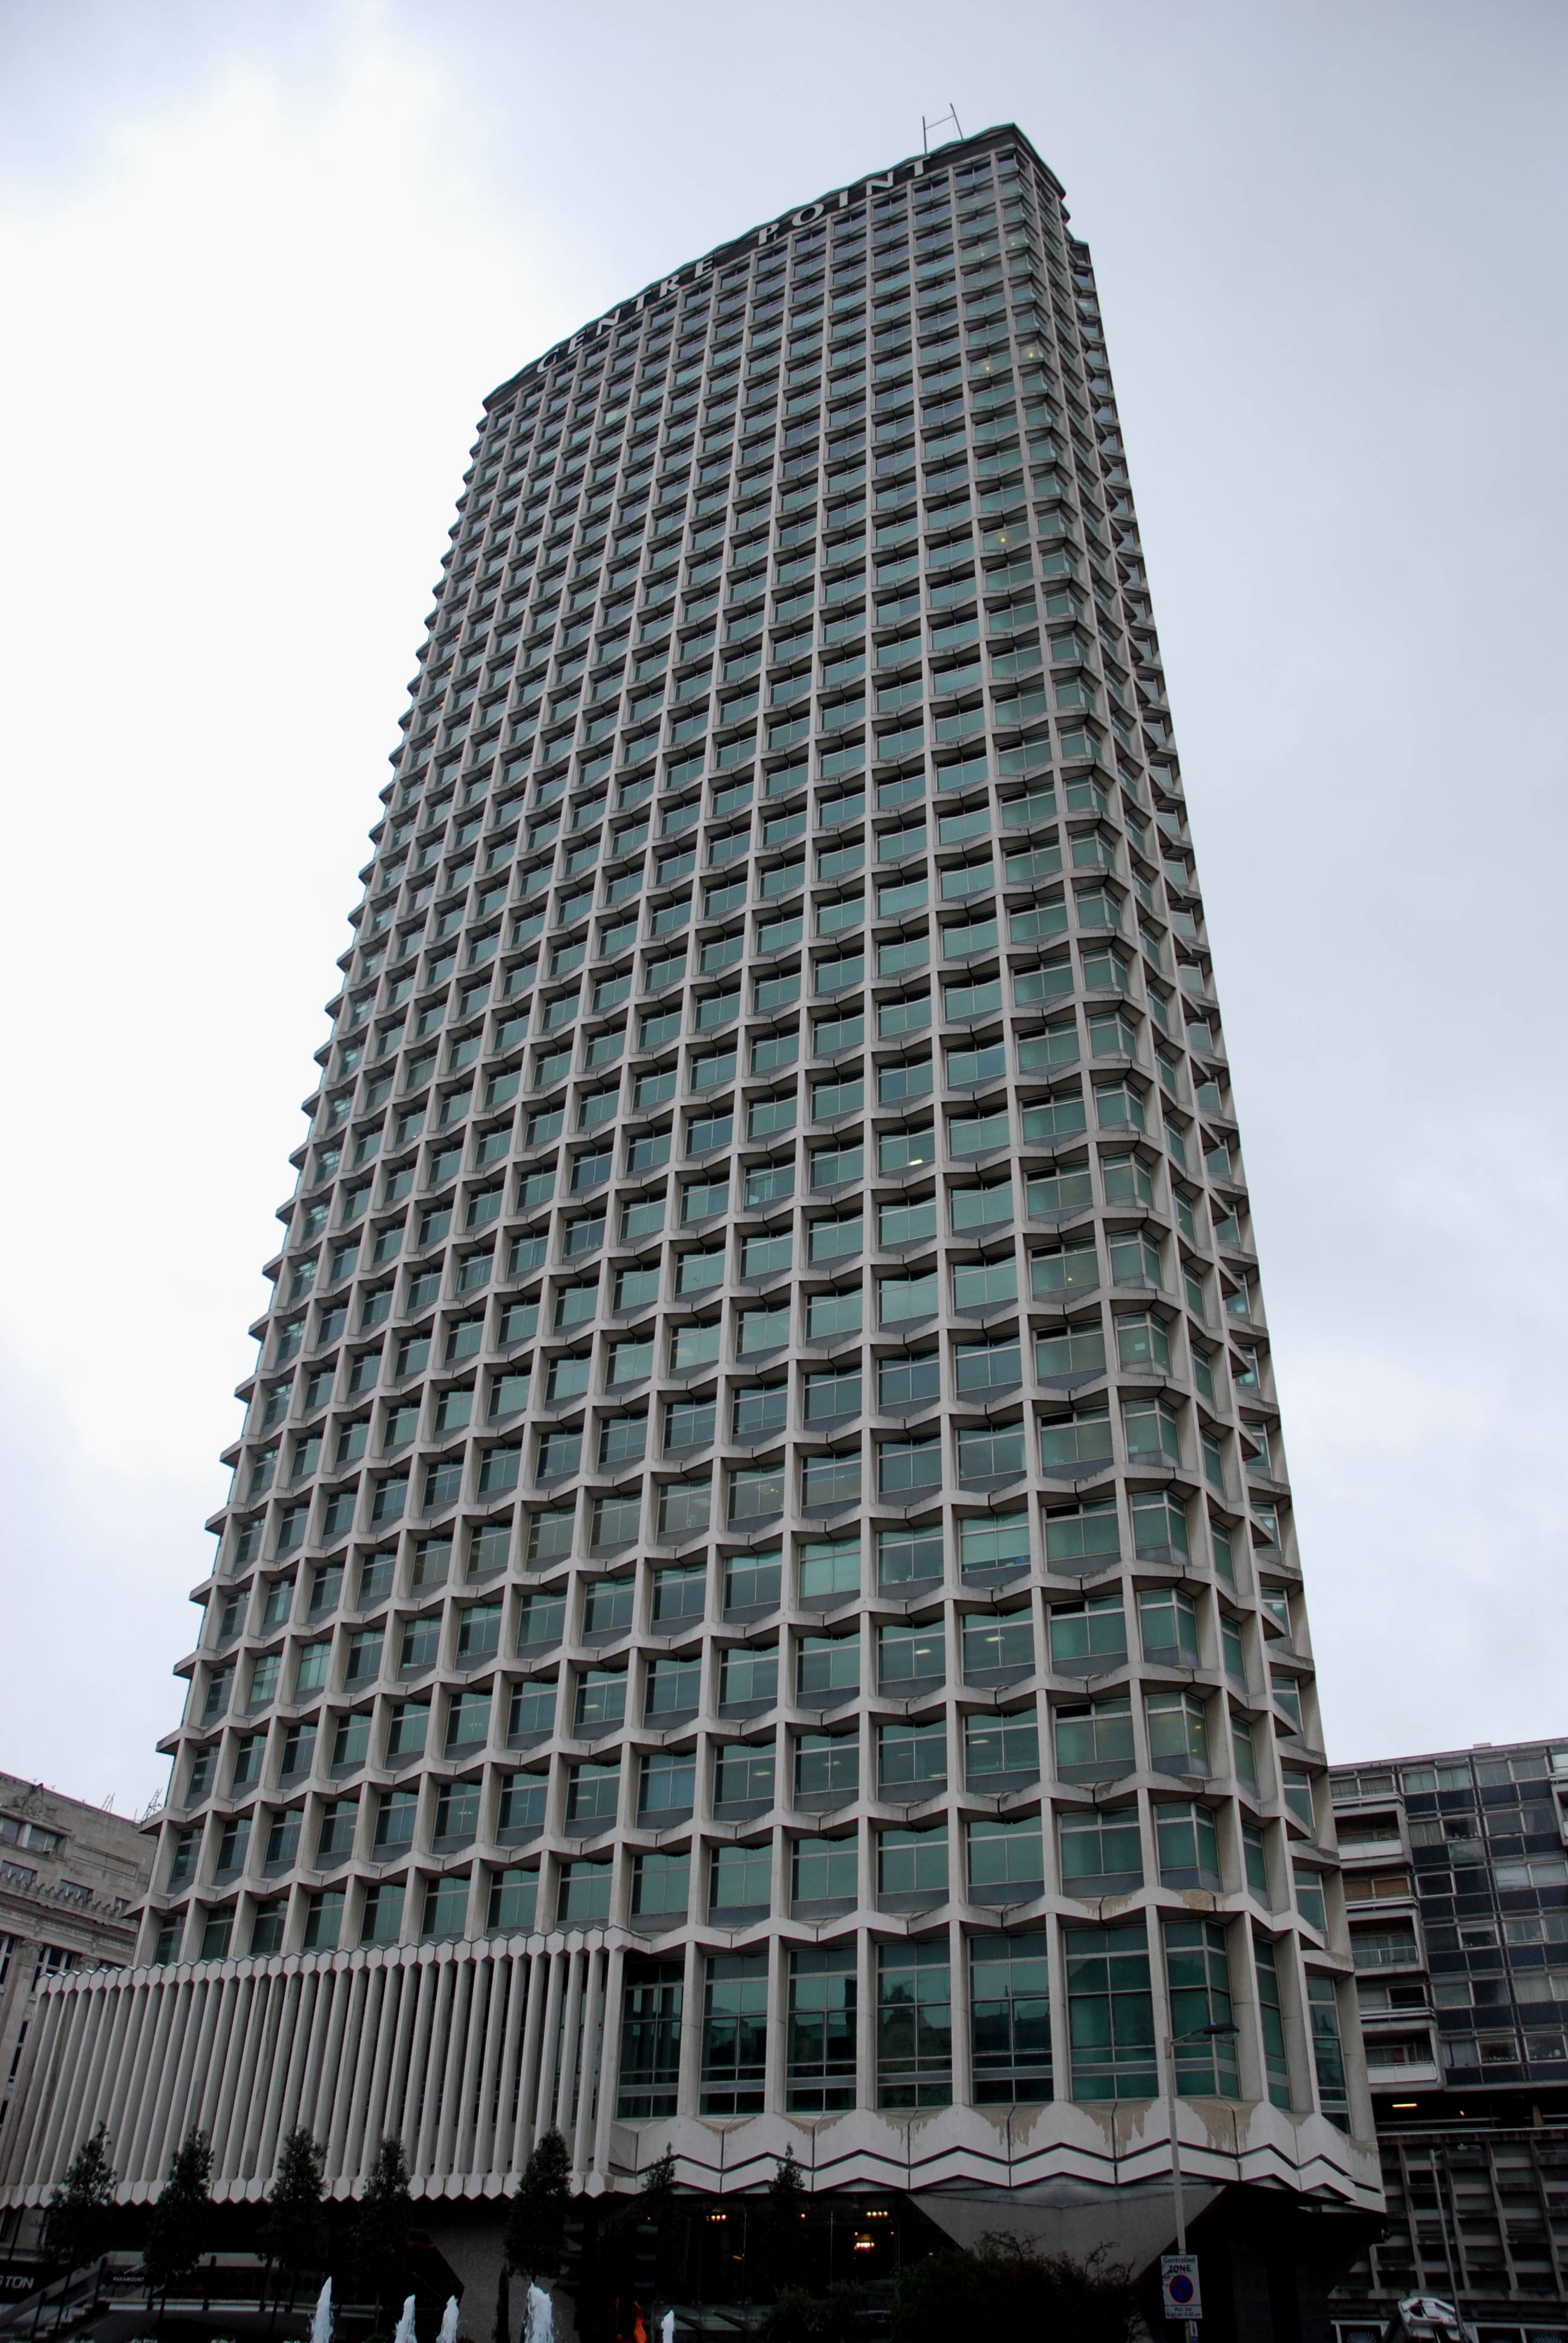 File:Tall building (3071109121).jpg - Wikimedia Commons